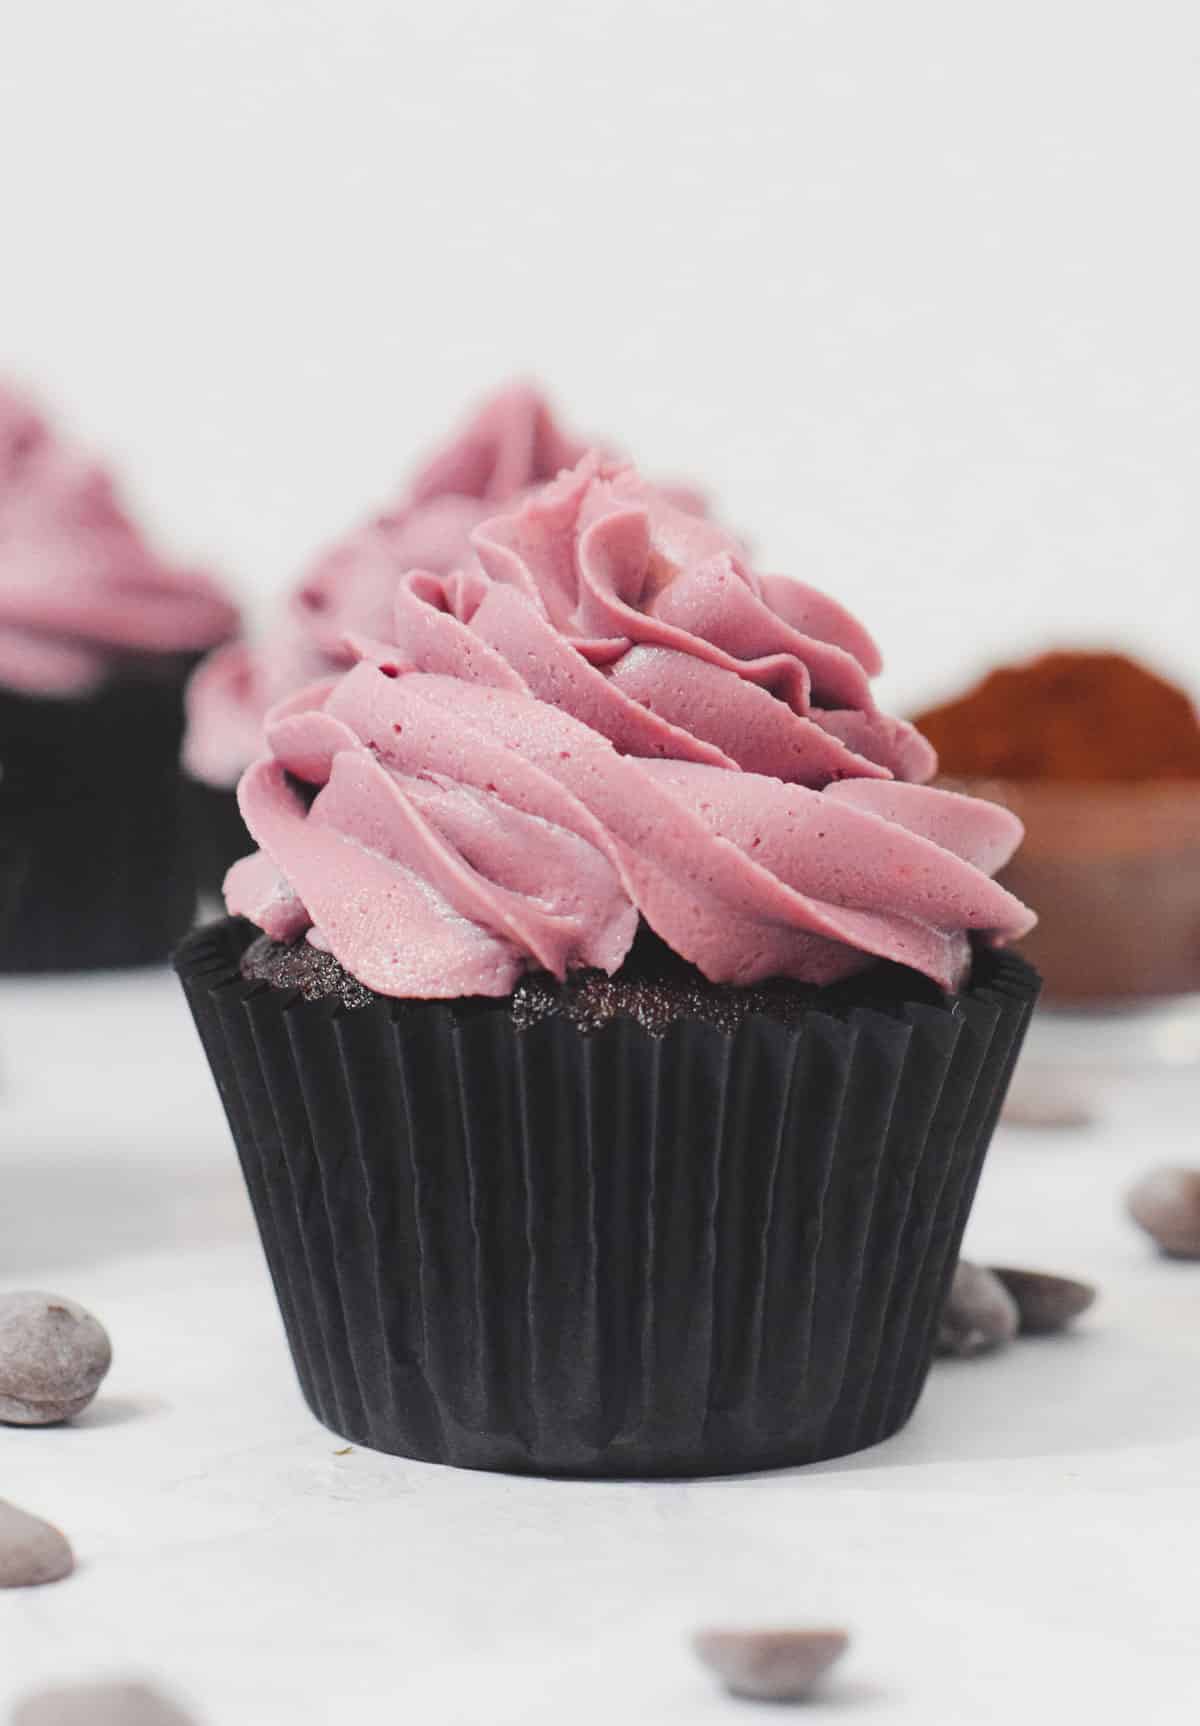 chocolate cupcakes with piped pink buttercream frosting swirl topping and cocoa powder.